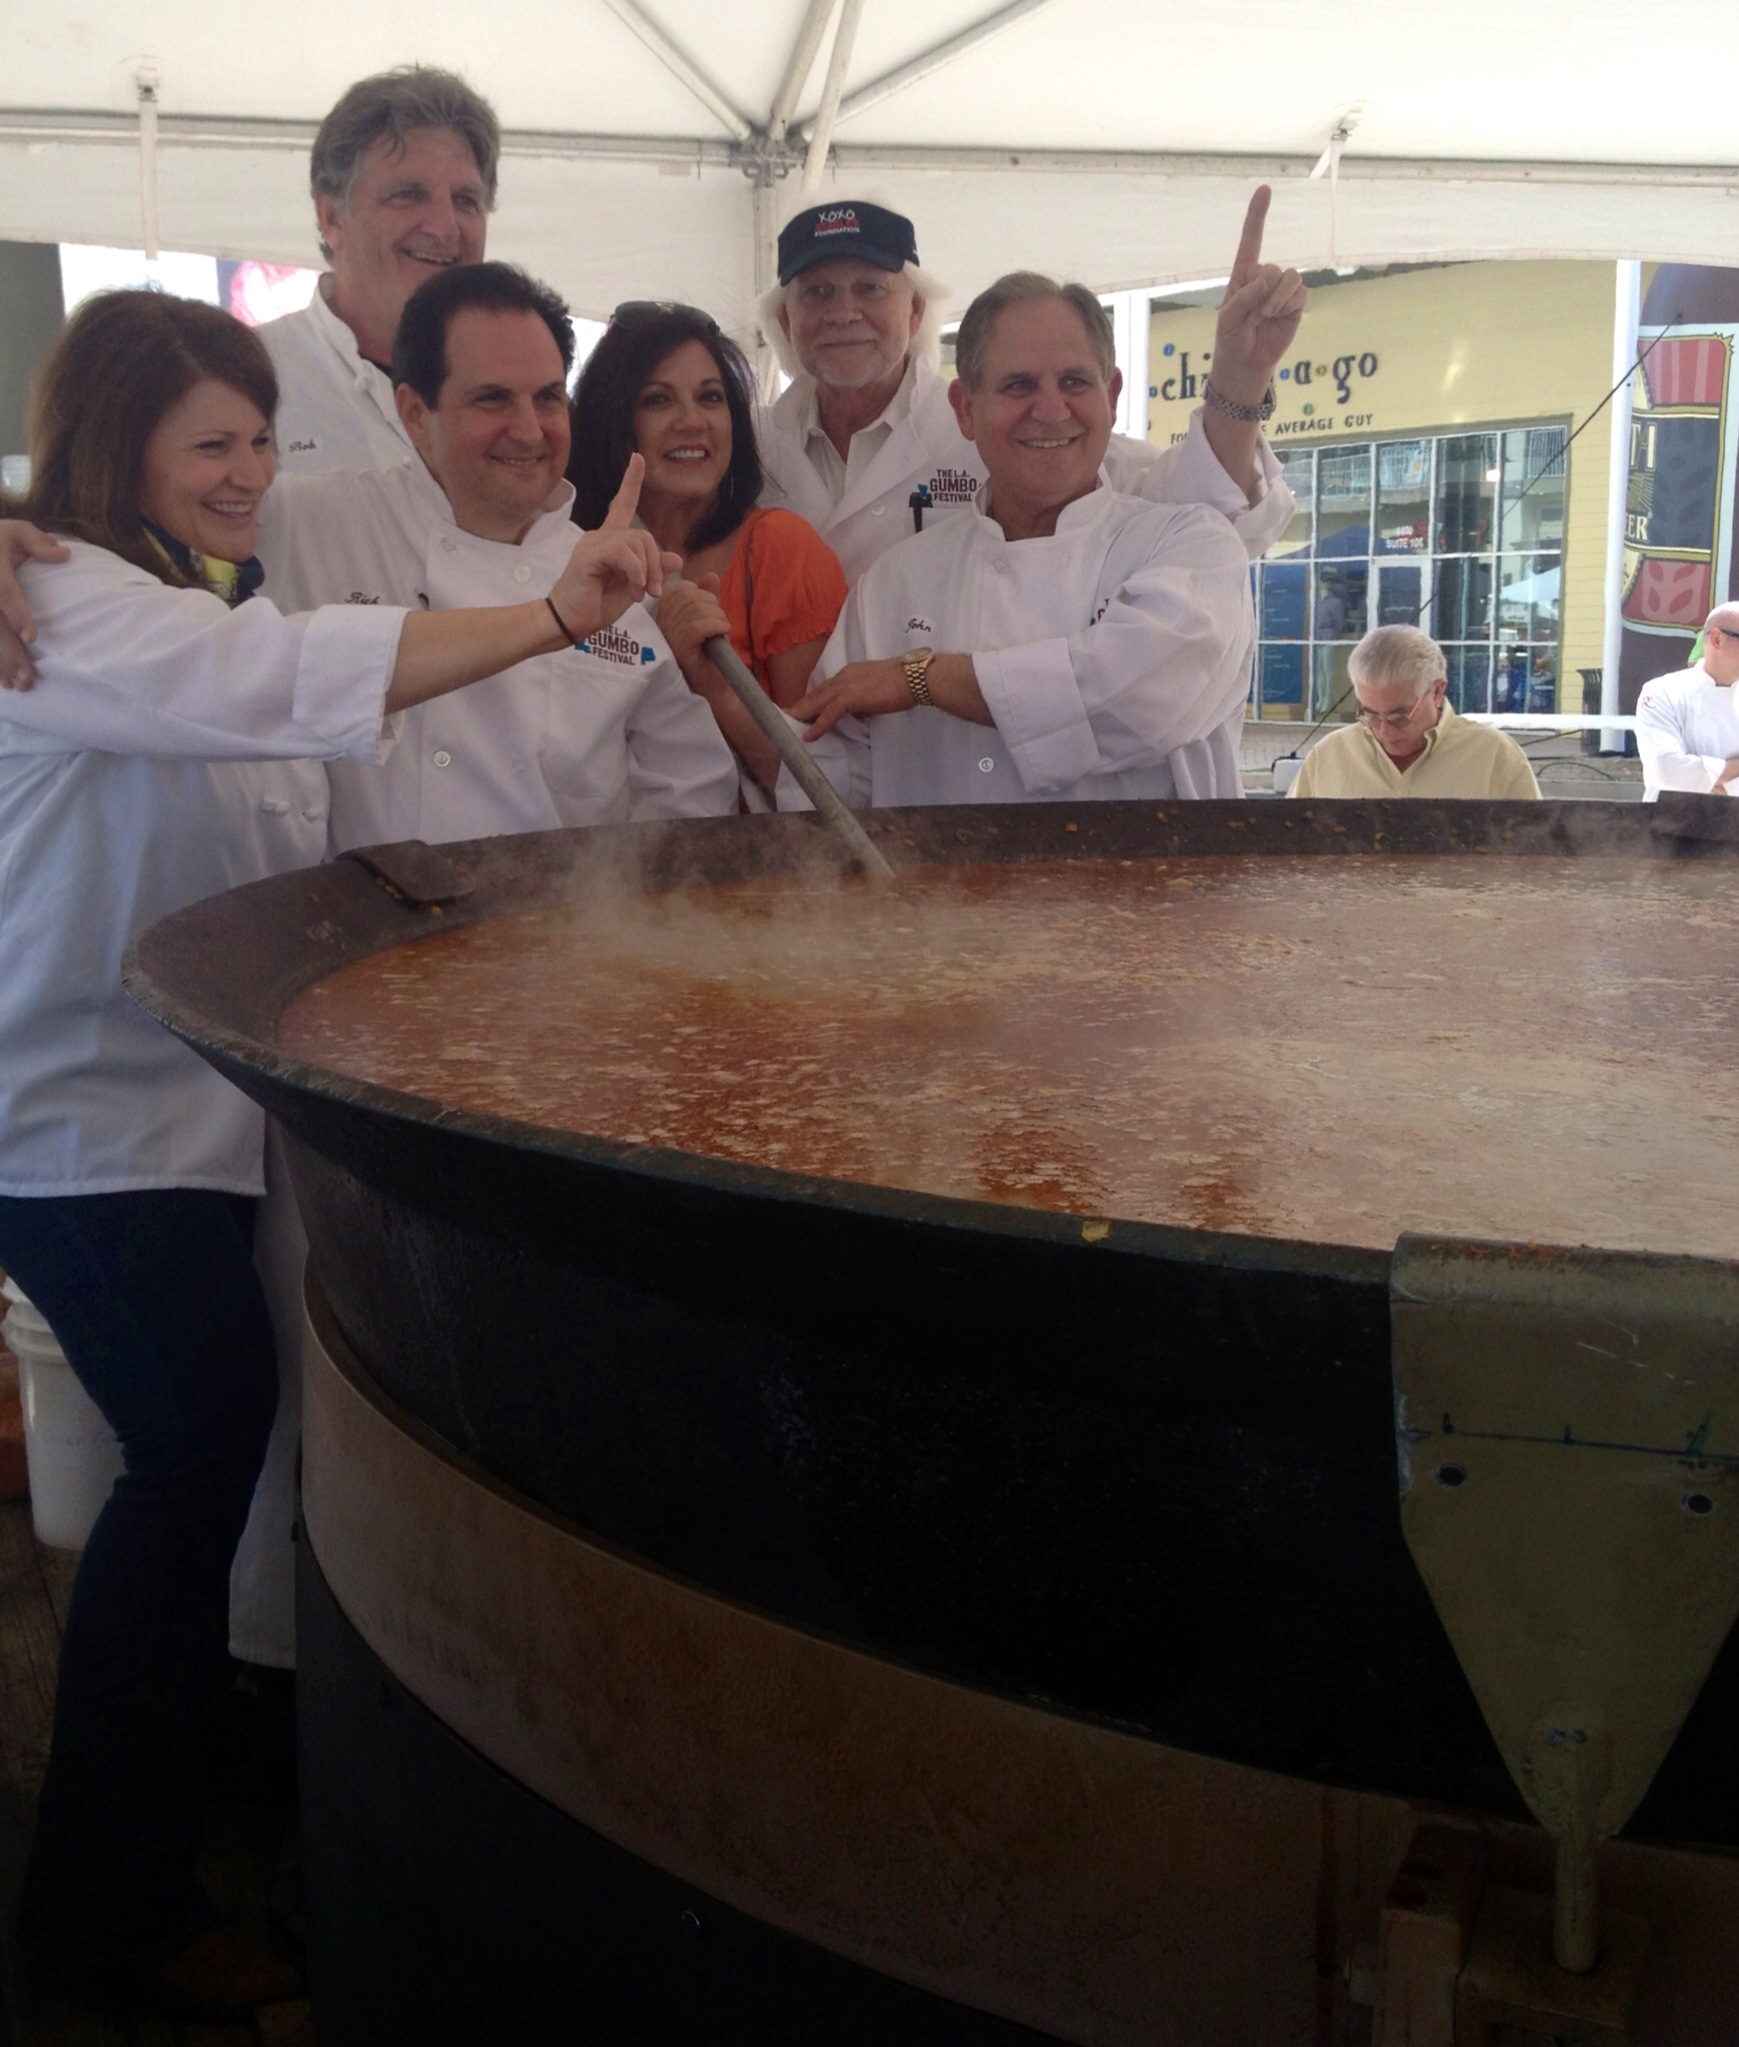 With John Folse making the world's largest pot of gumbo